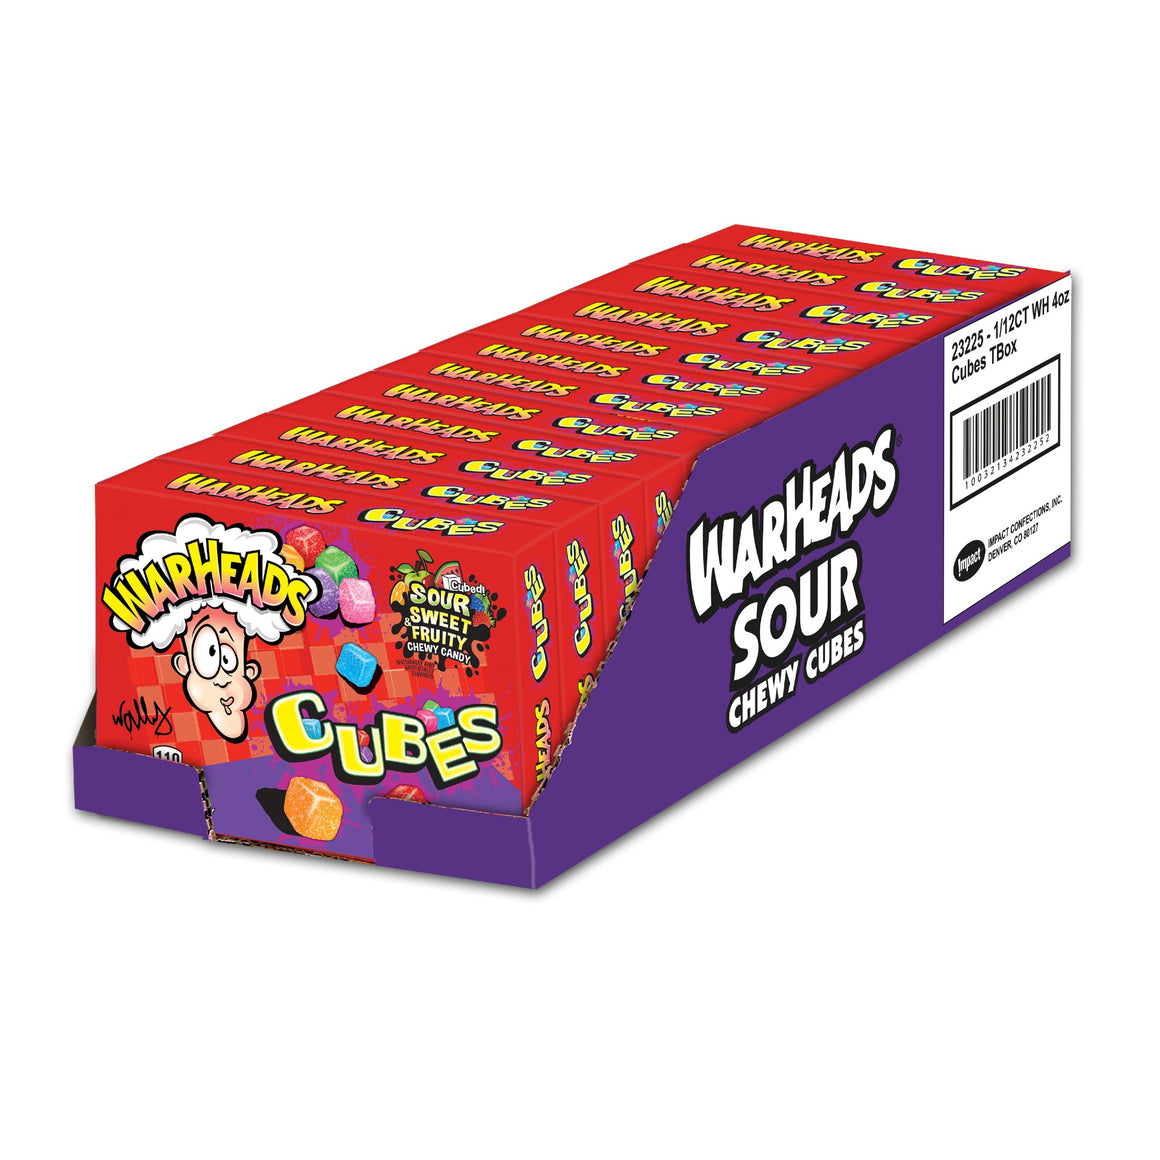 All City Candy WarHeads Chewy Cubes Sour Candy - 4-oz. Theater Box Theater Boxes Impact Confections For fresh candy and great service, visit www.allcitycandy.com